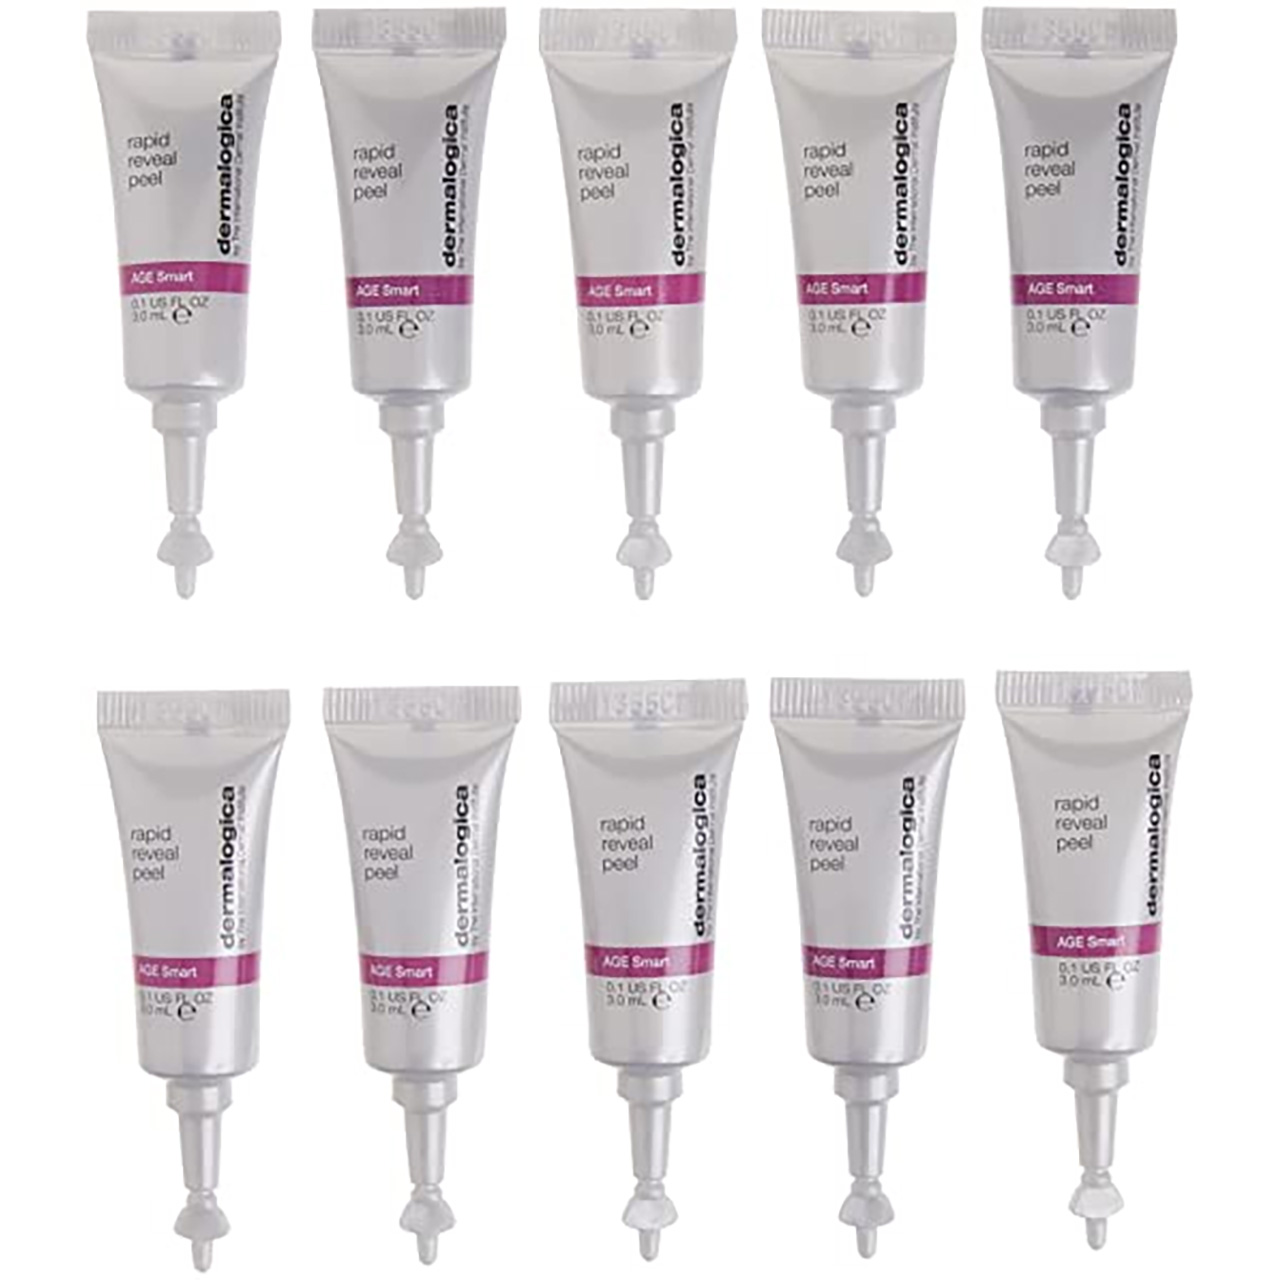 Dermalogica Rapid Reveal Peel - 10 Tubes Questions & Answers